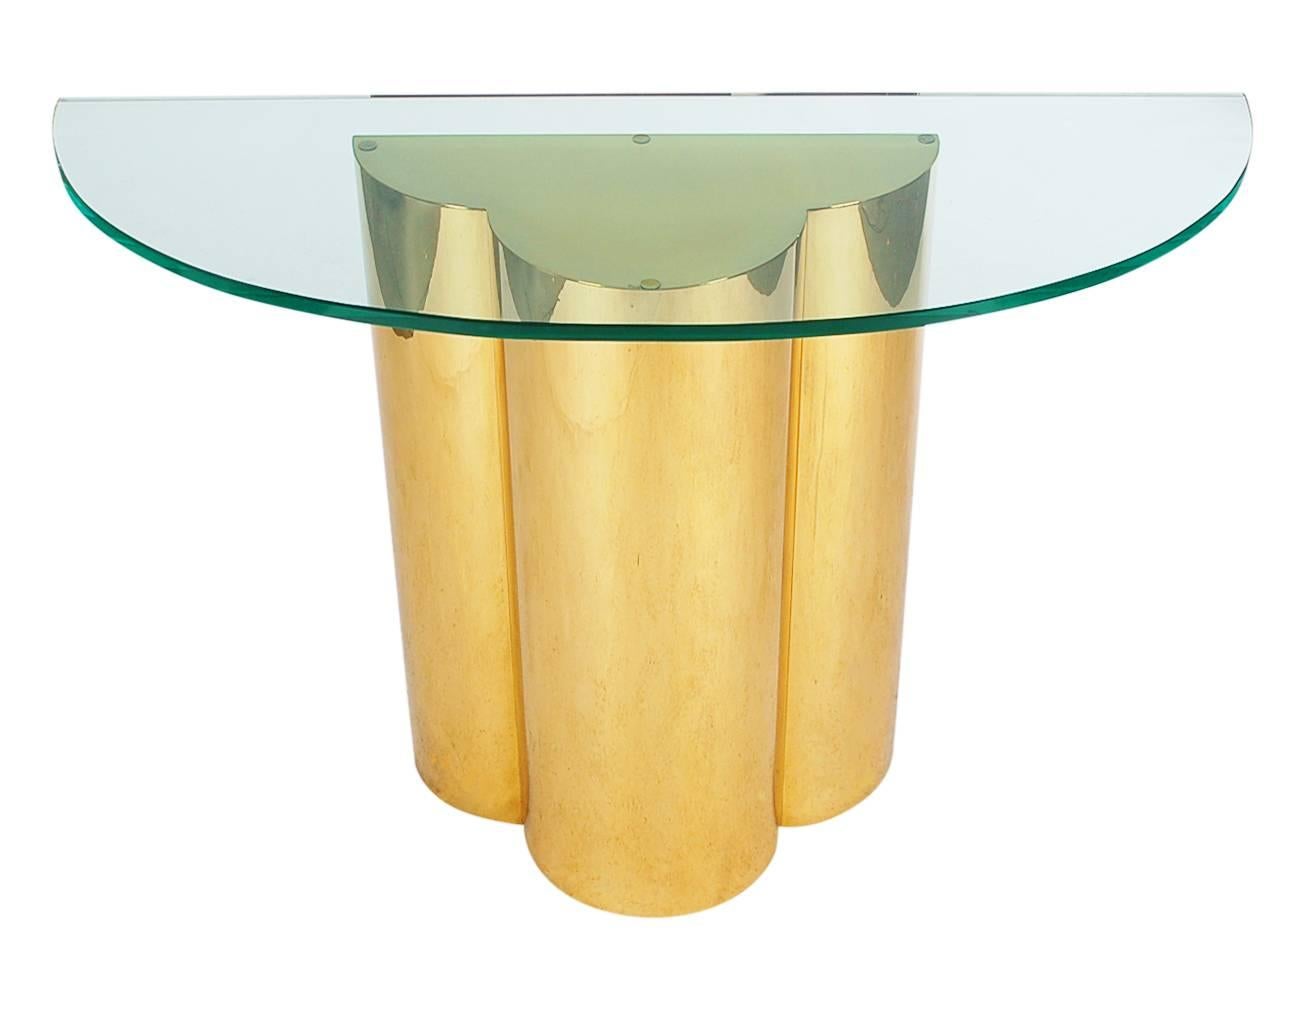 American Hollywood Regency Brass and Glass Trefoil Console Table Attributed to C. Jere